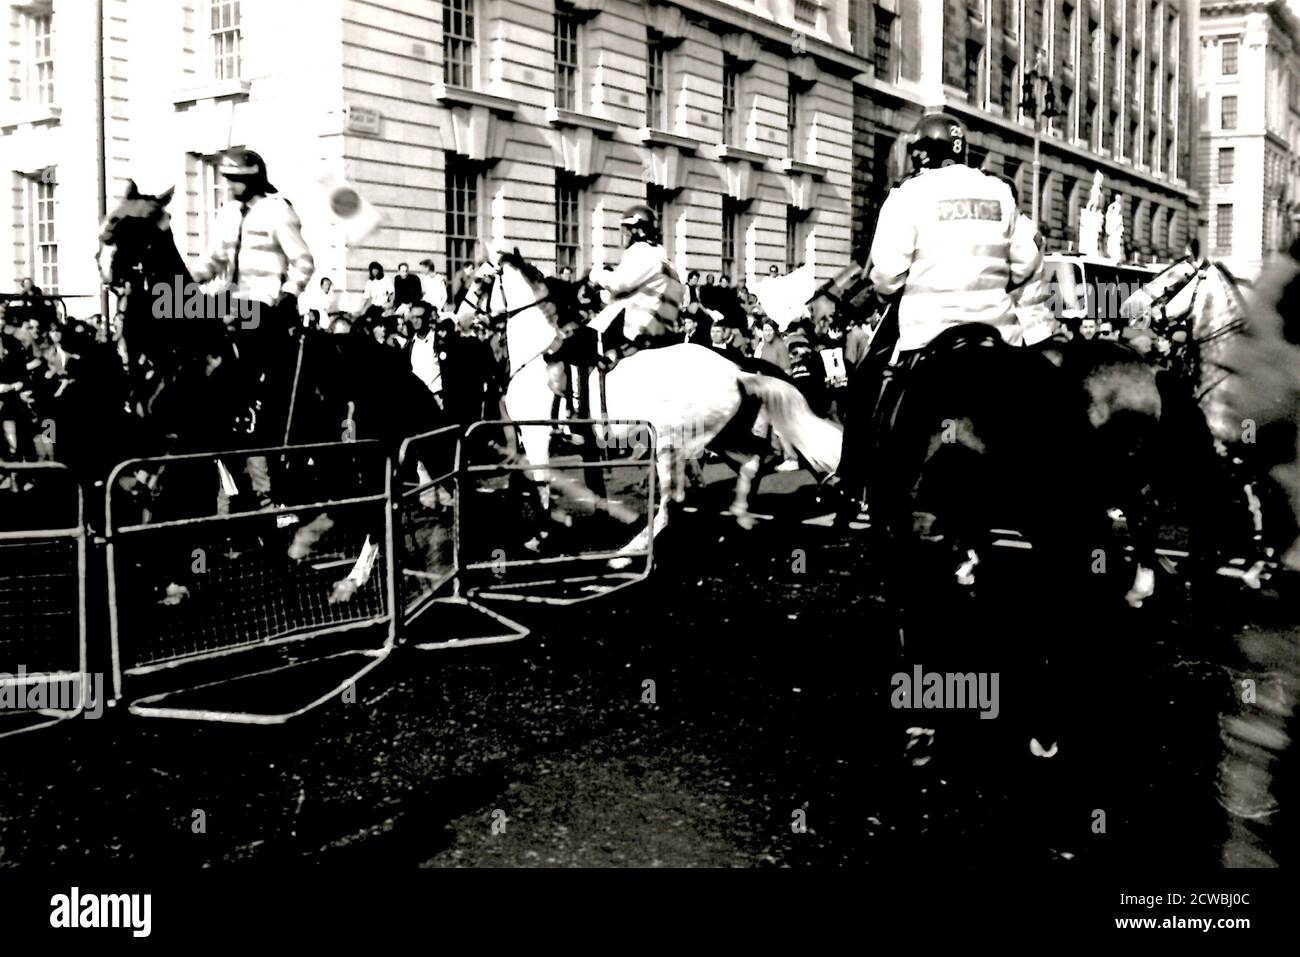 Photographs taken during the Poll Tax riots. The Poll Tax Riots were a series of riots in British towns and cities during protests against the Community Charge (poll tax), introduced by Prime Minister Margaret Thatcher. Stock Photo